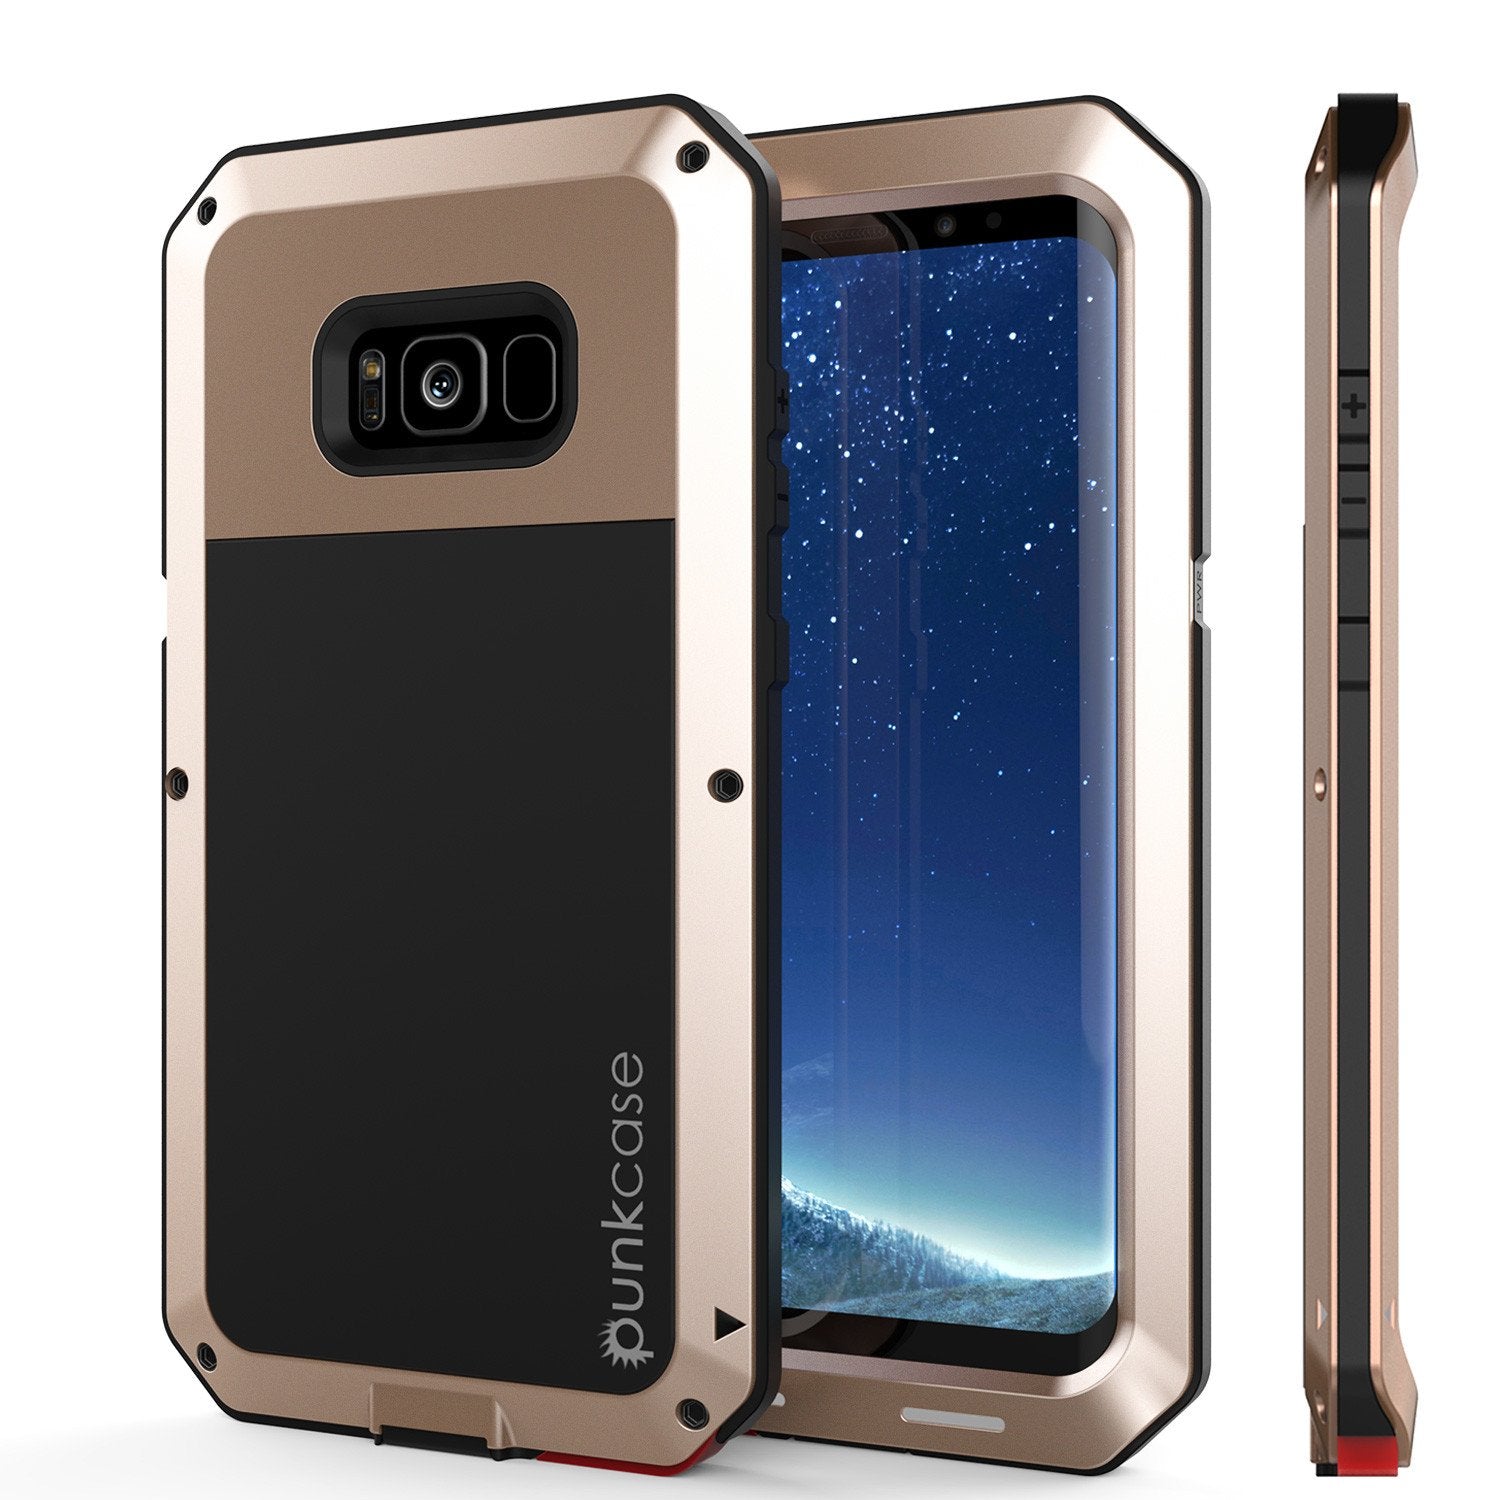 Galaxy S8+ Plus Metal Case, Heavy Duty Military Grade Rugged Armor Cover [shock proof] W/ Prime Drop Protection [GOLD]